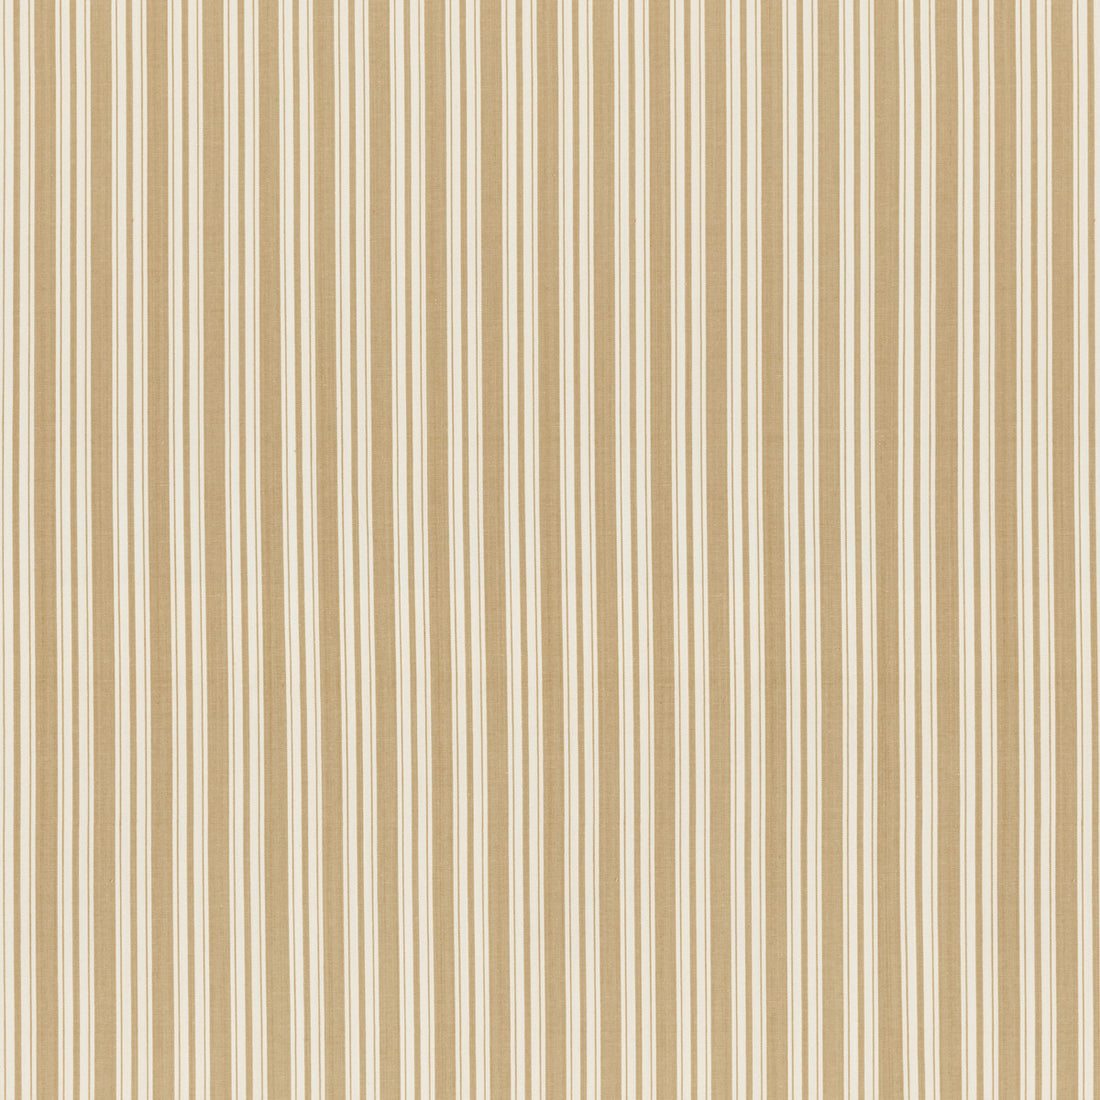 Selune Stripe fabric in beige color - pattern 8022118.16.0 - by Brunschwig &amp; Fils in the Normant Checks And Stripes II collection